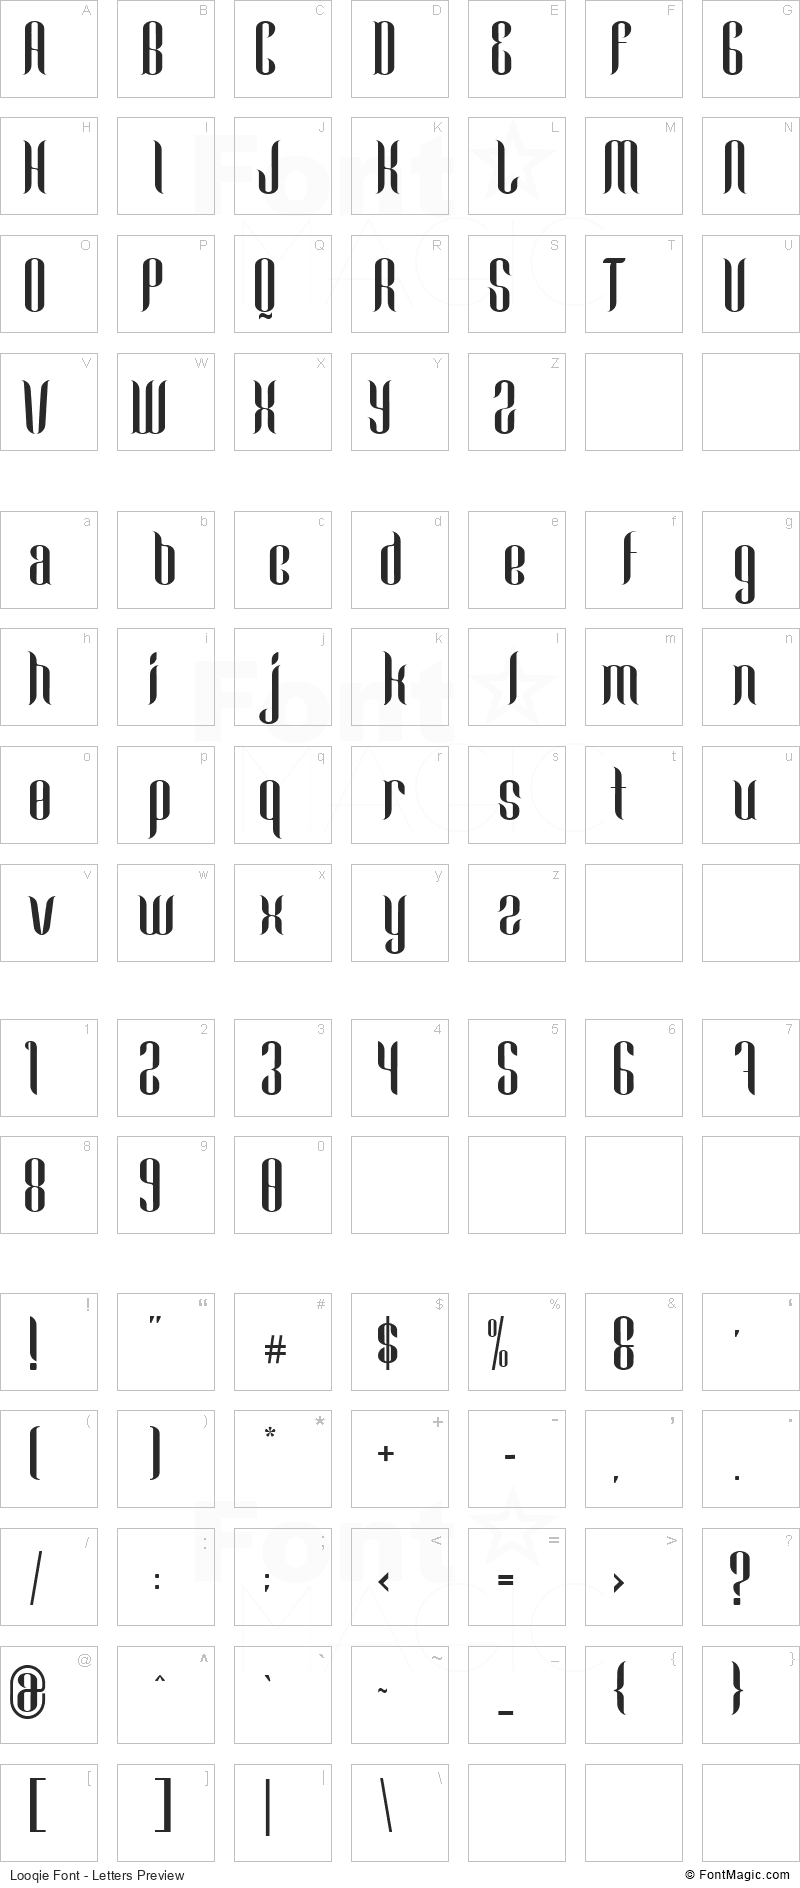 Looqie Font - All Latters Preview Chart